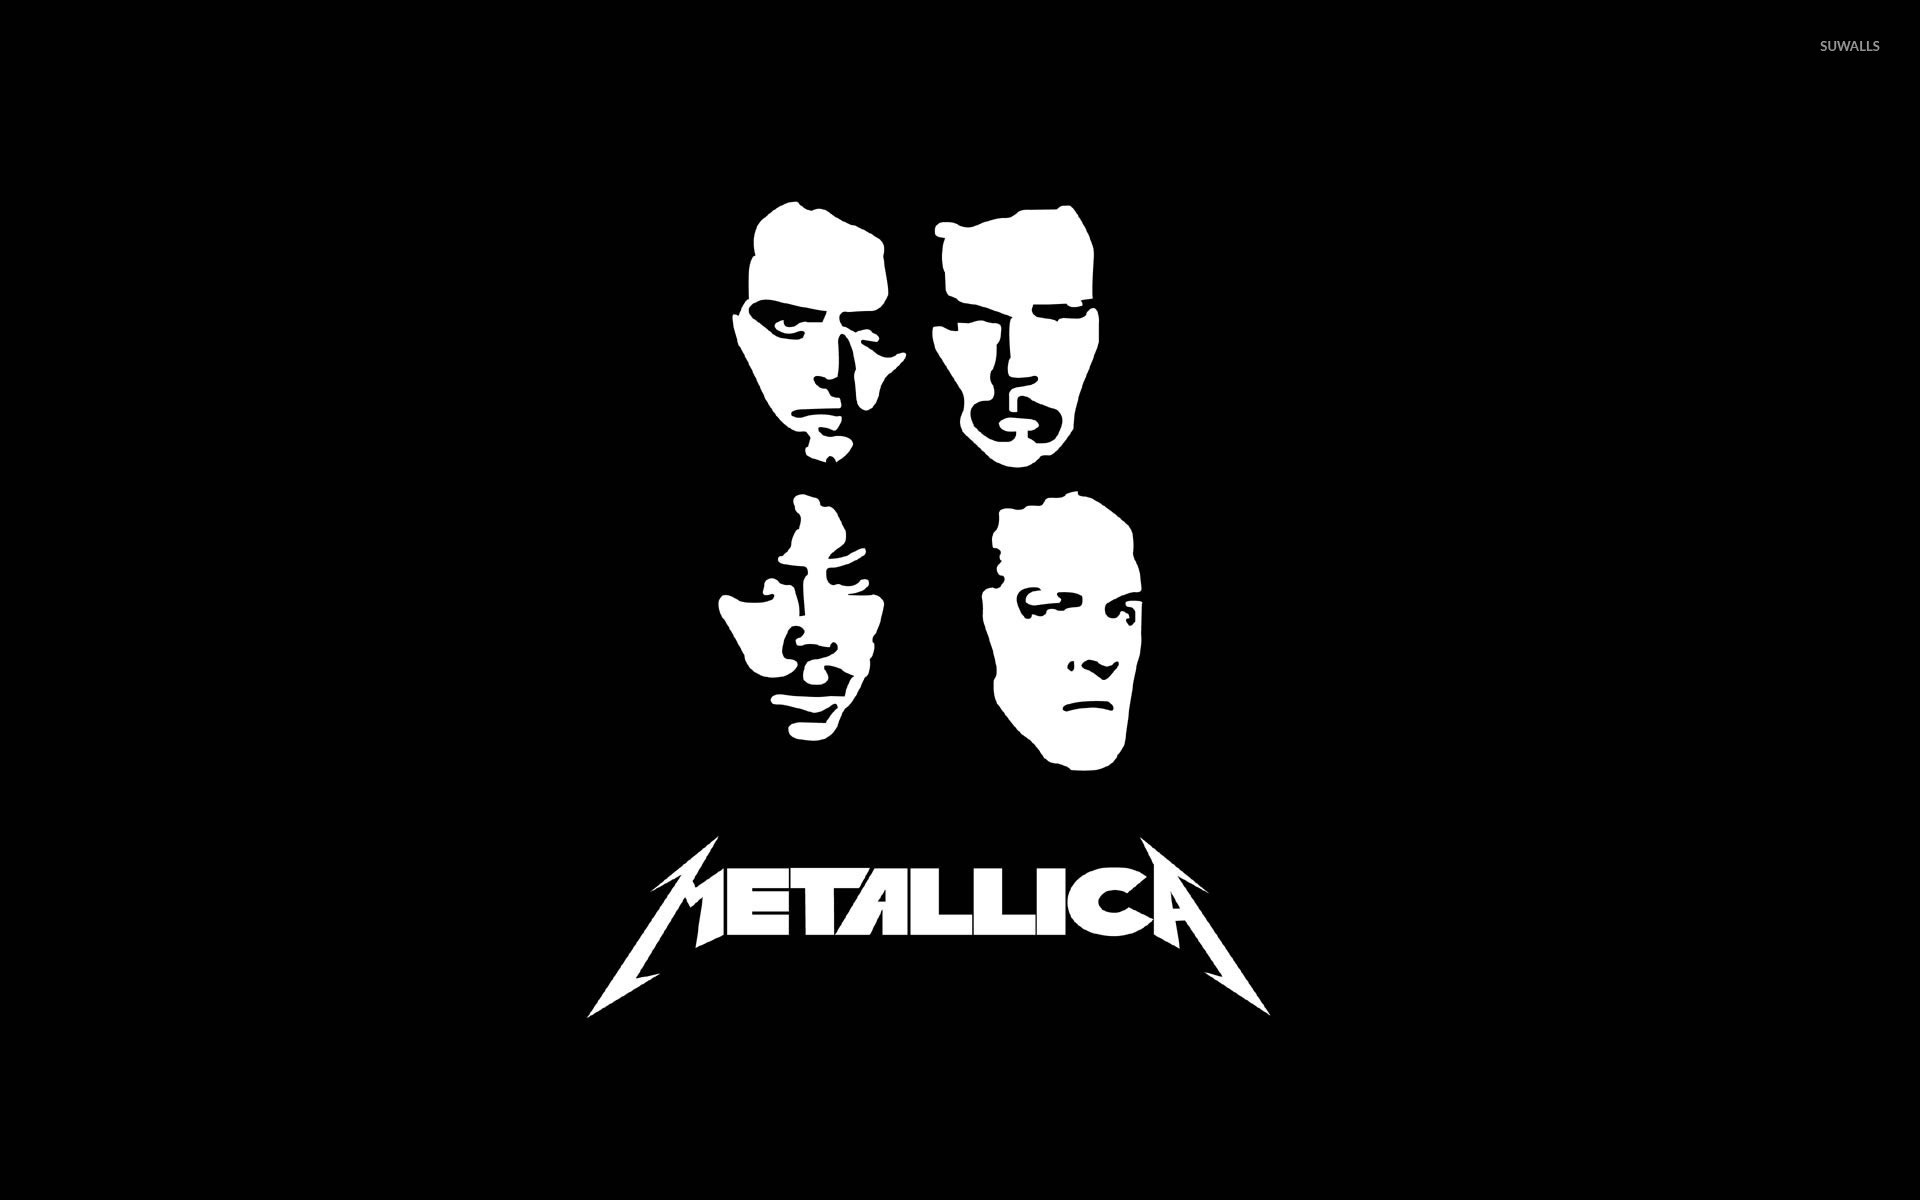 Metallica wallpaper ·① Download free awesome wallpapers ...